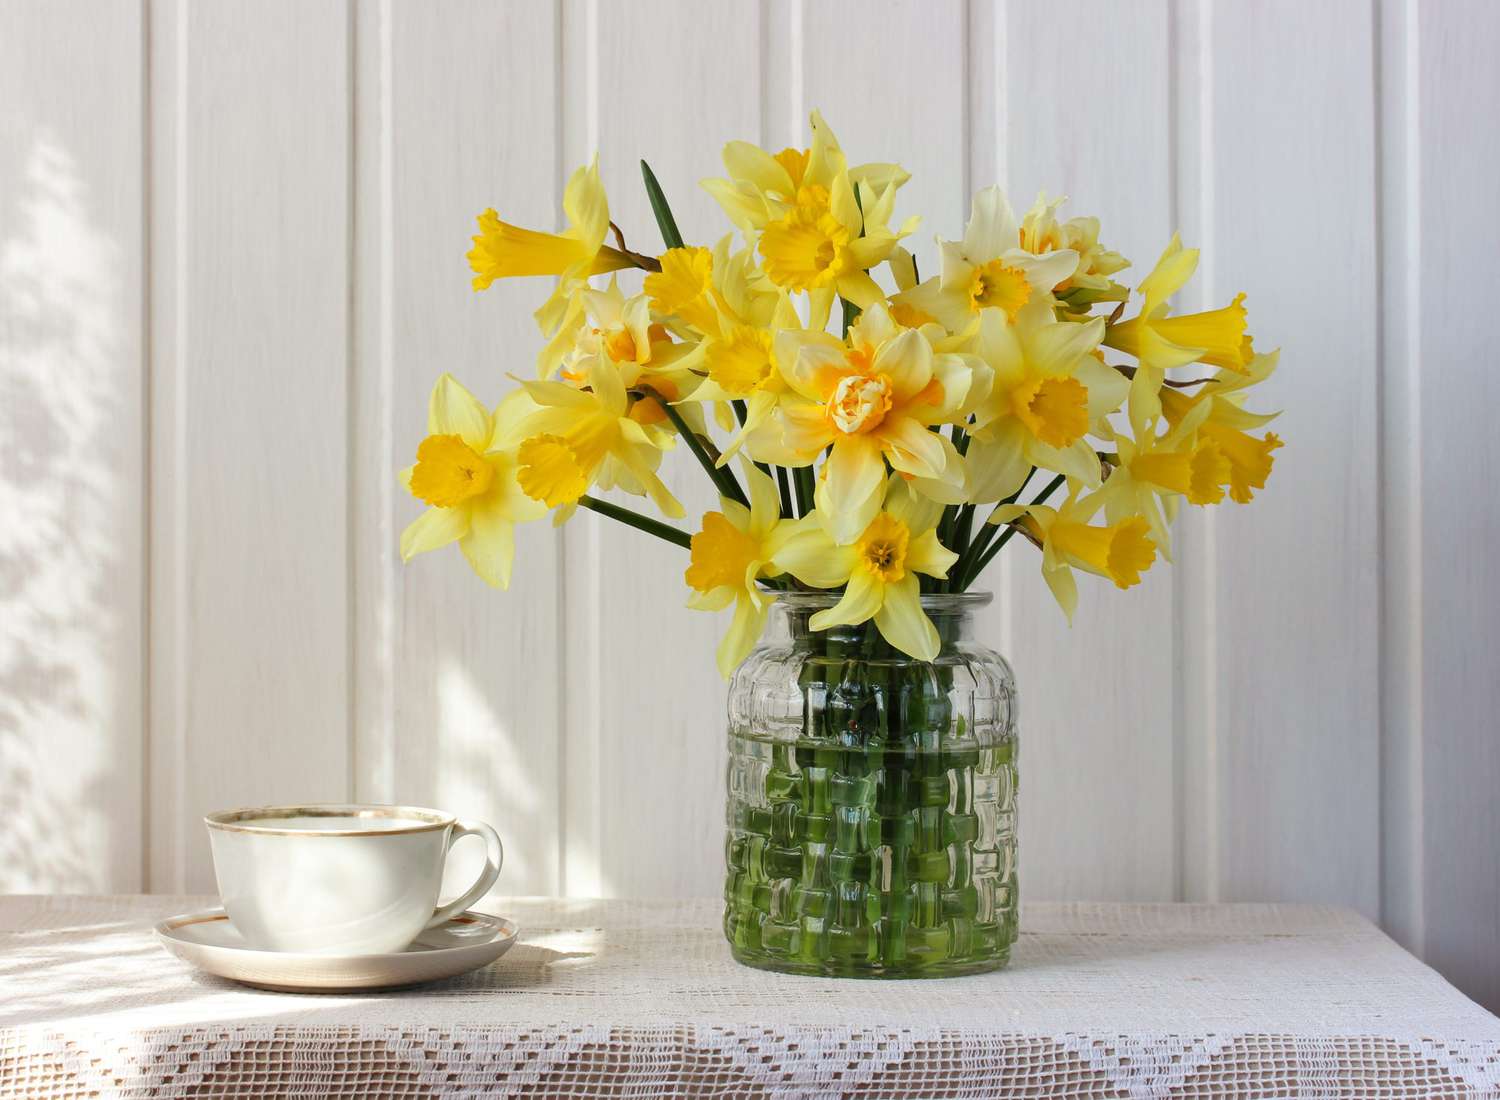 How Long Will Daffodils Last In A Vase